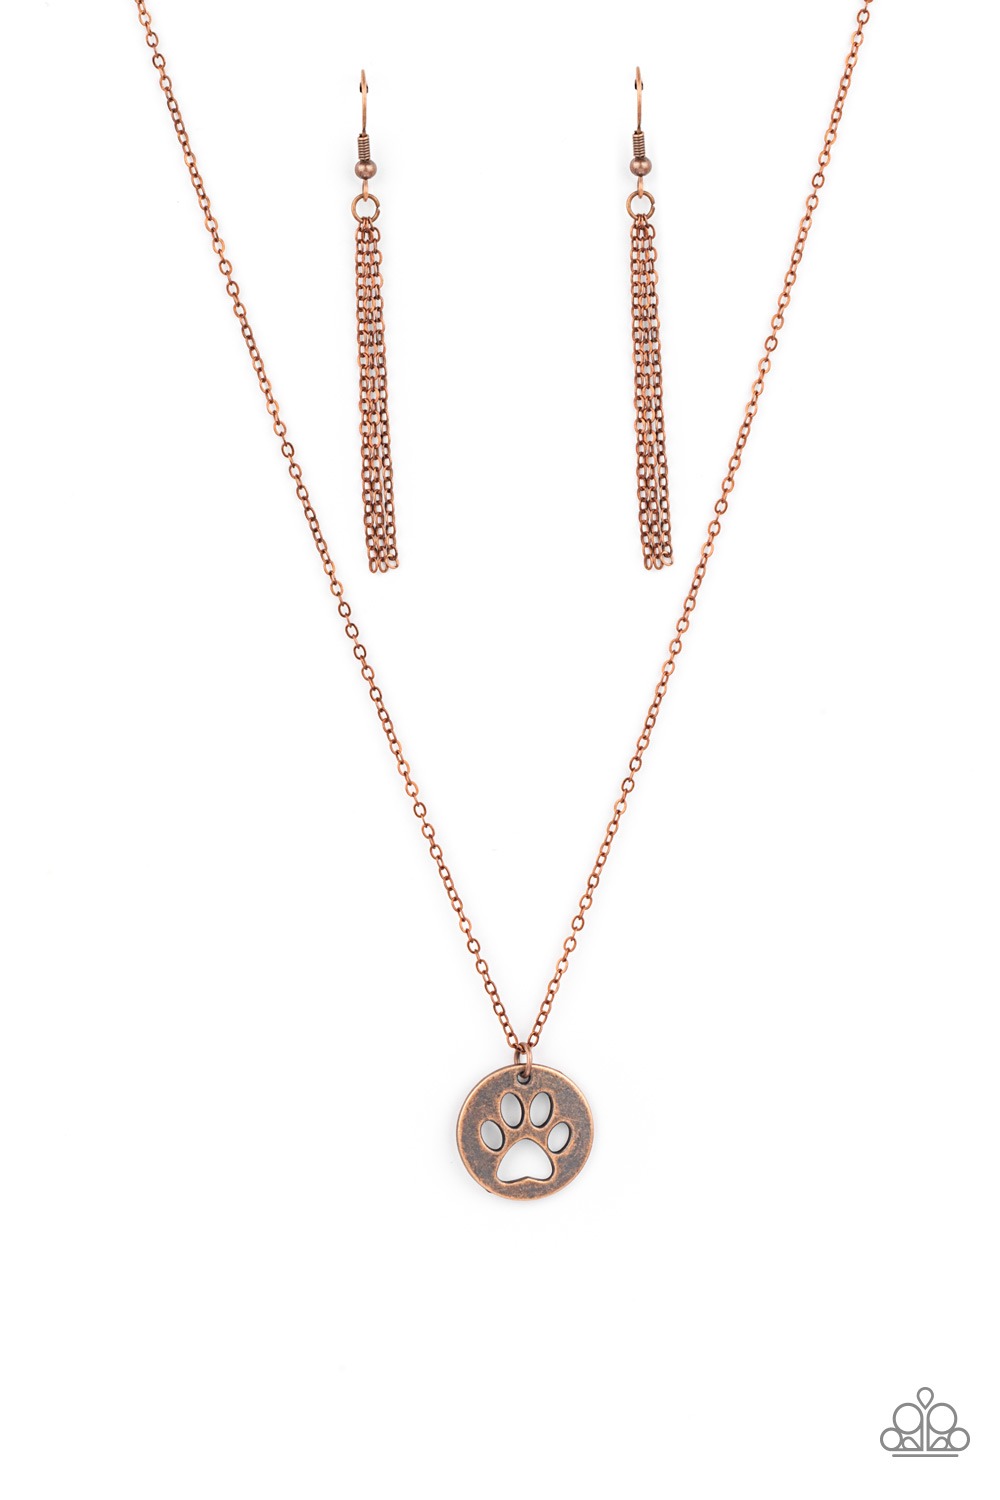 Necklace - Think PAW-sitive - Copper